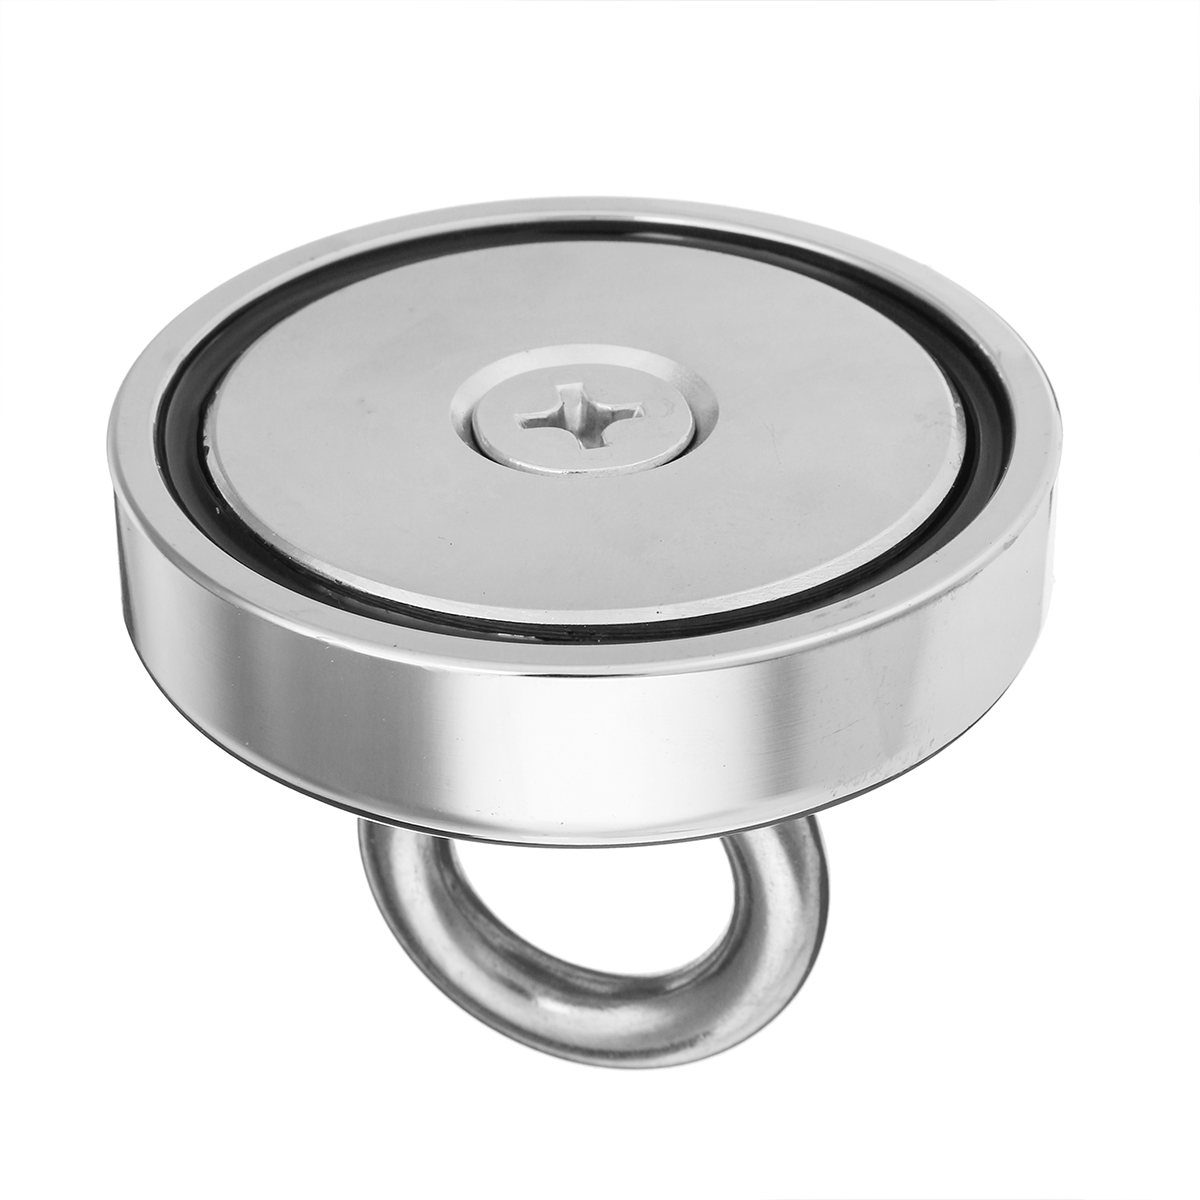 Find 350KG/450KG/600KG Neodymium Magnet with 10m Rope for Detecting Metal Treasure for Sale on Gipsybee.com with cryptocurrencies